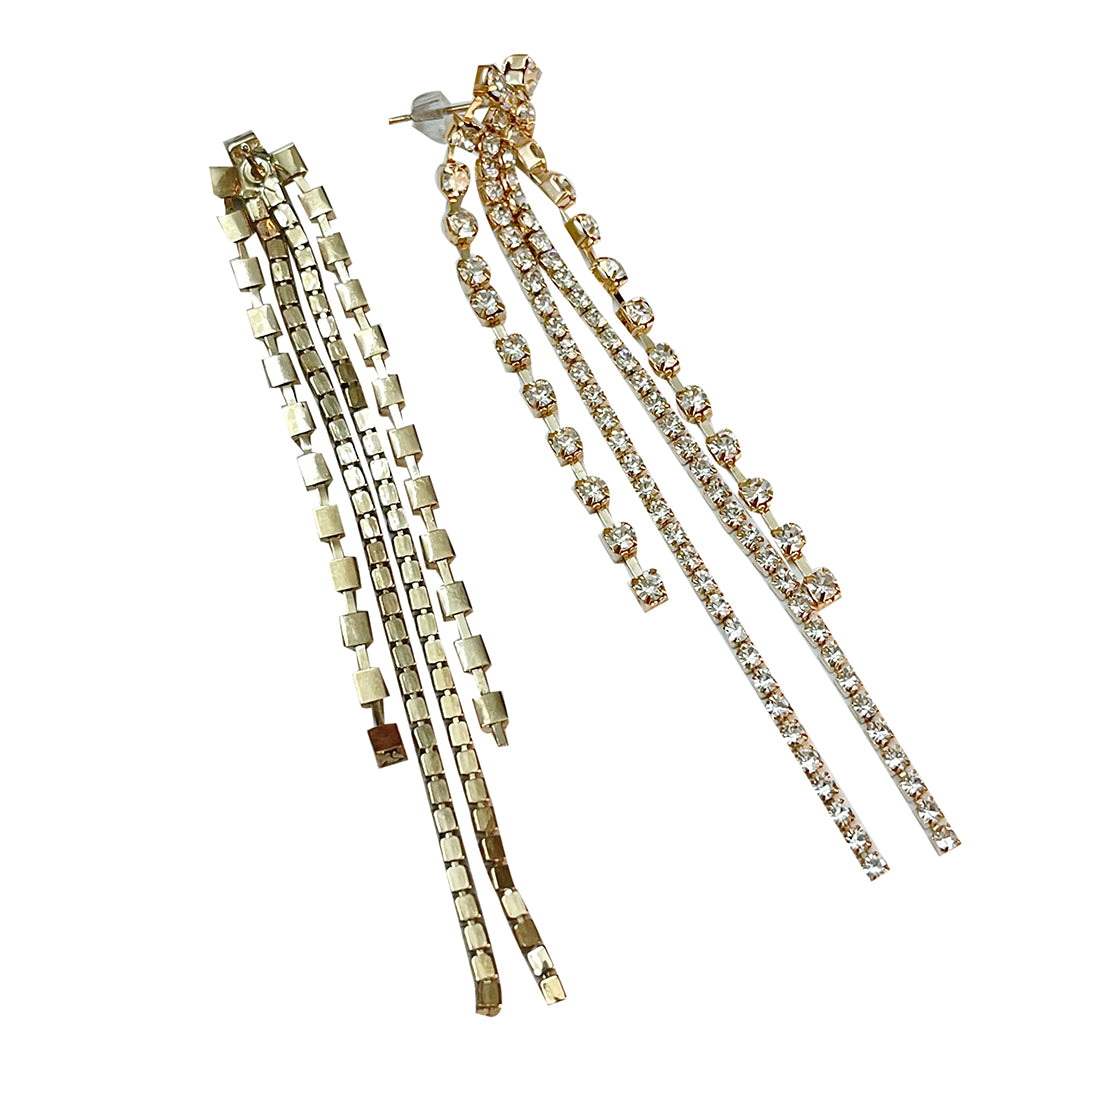 CONTEMPORARY WHITE DIAMANTE CRYSTAL STUDDED GOLD-TONED LONG TASSEL DROP EARRINGS